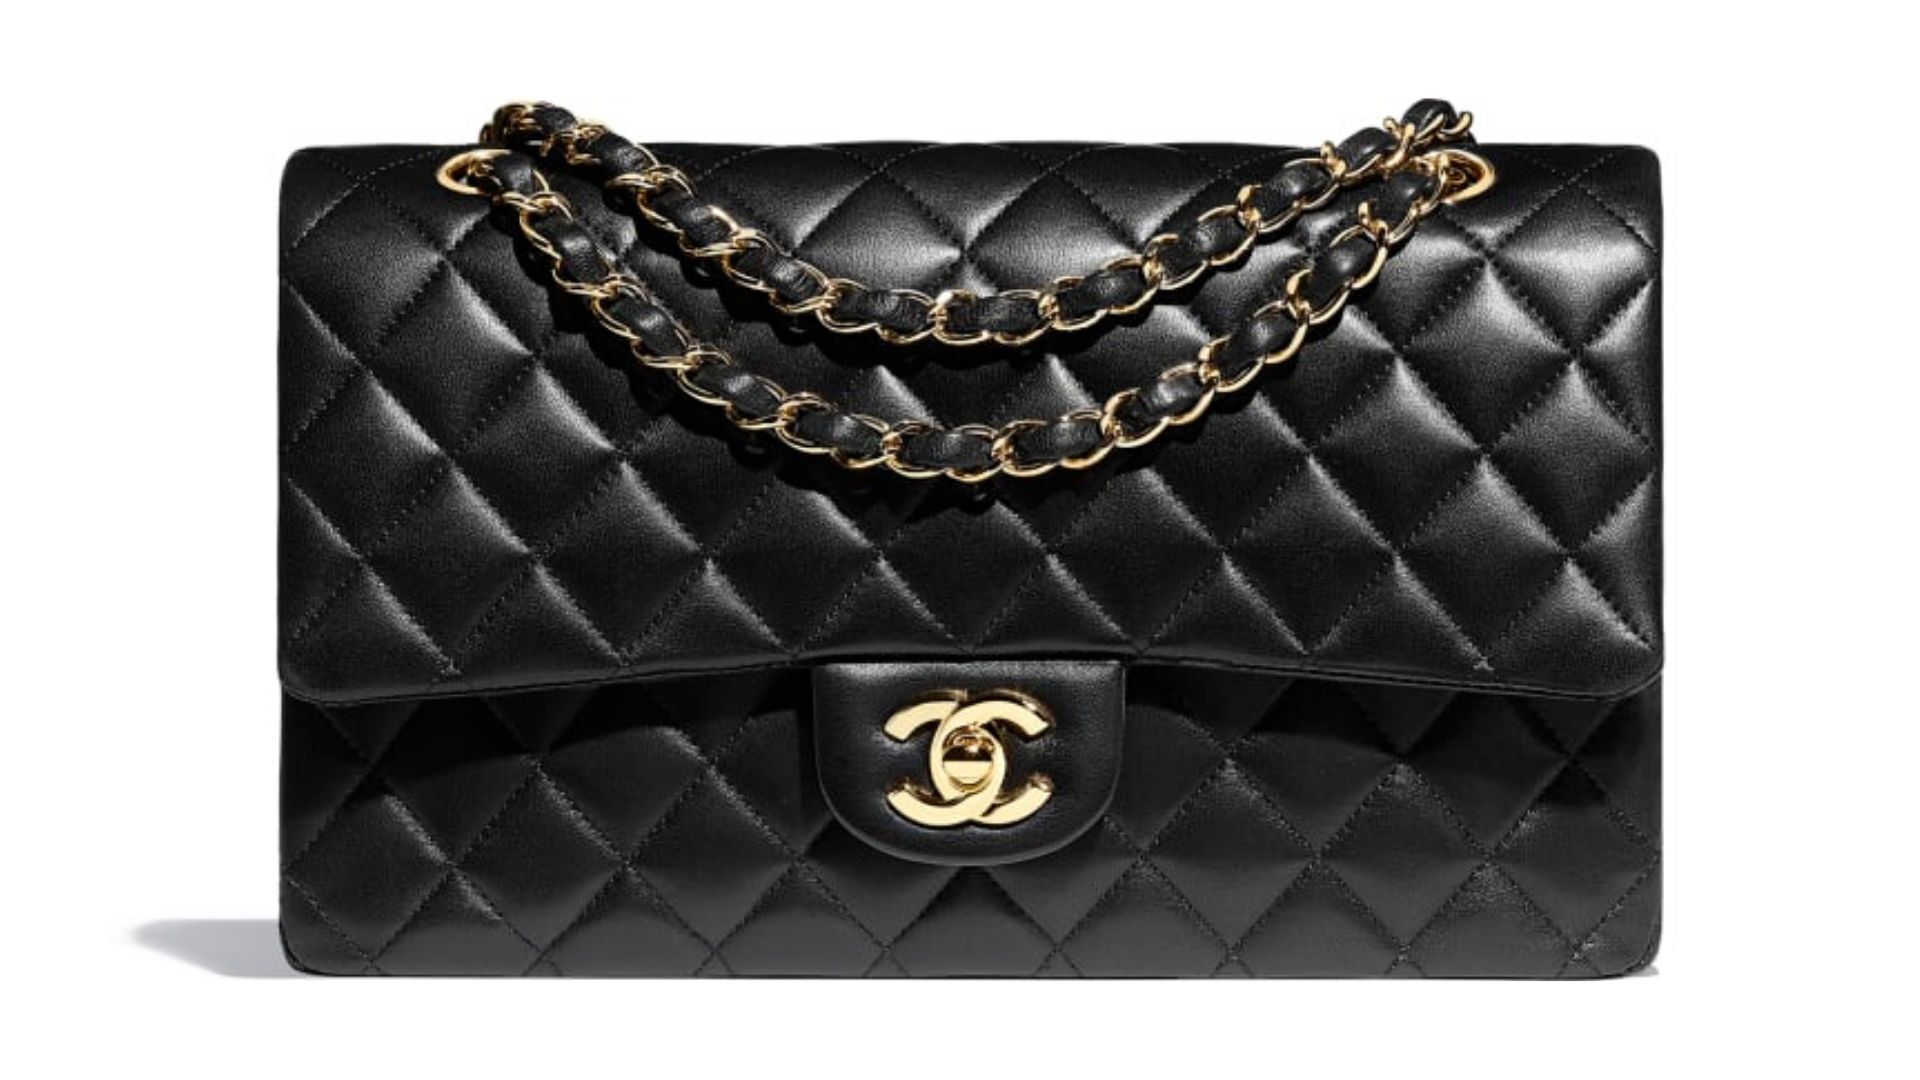 Memory Lane: The 10 Most Iconic Chanel Handbags of All Time